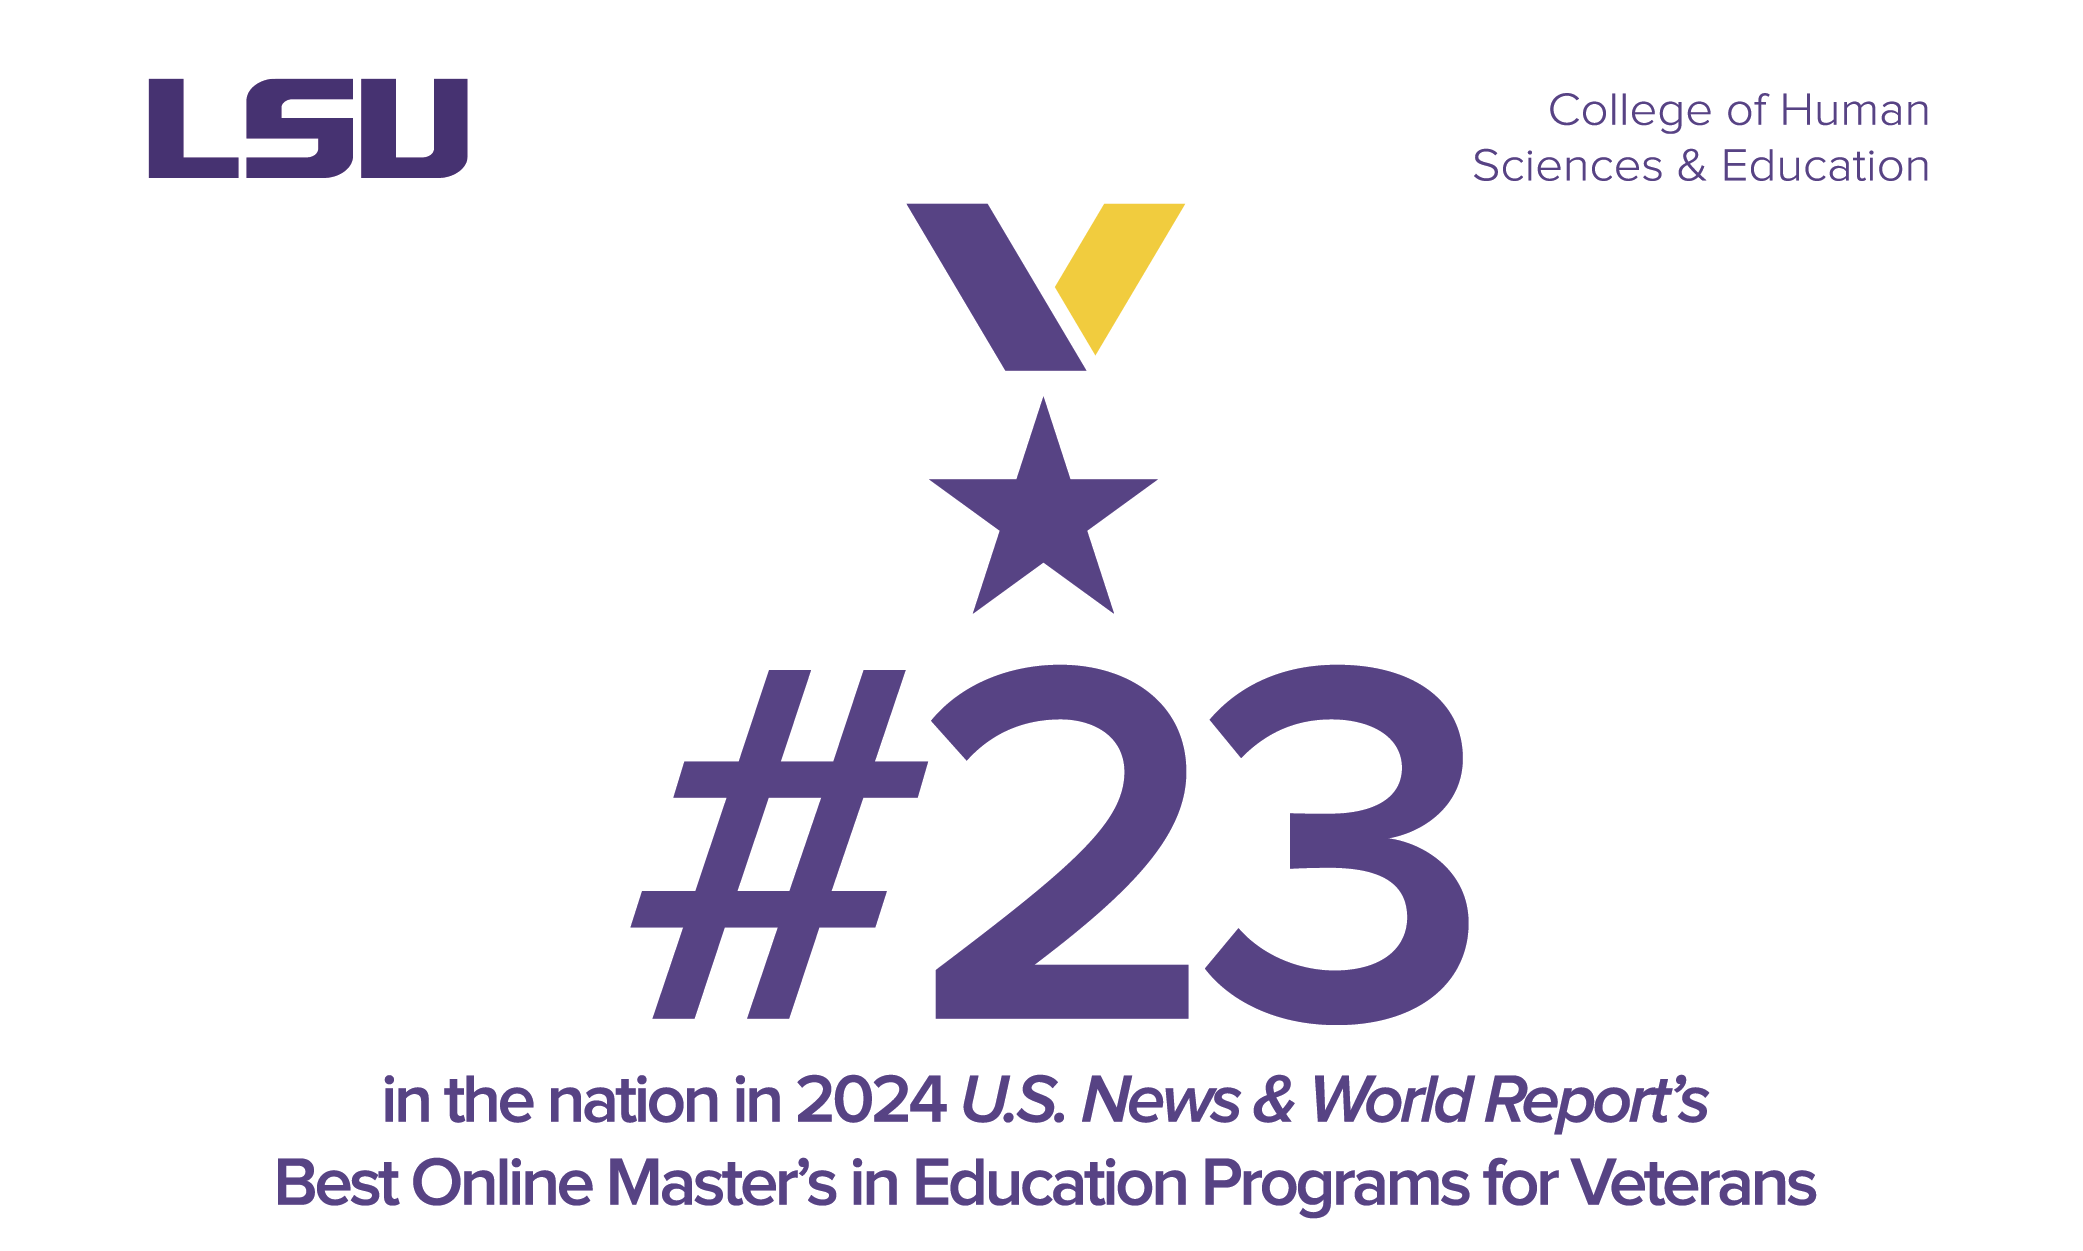 An image containing a large #23 with a purple and gold V. The words in the nation in 2024 U.S. News & World Report's Best Online Master's in Education Programs for Veterans.